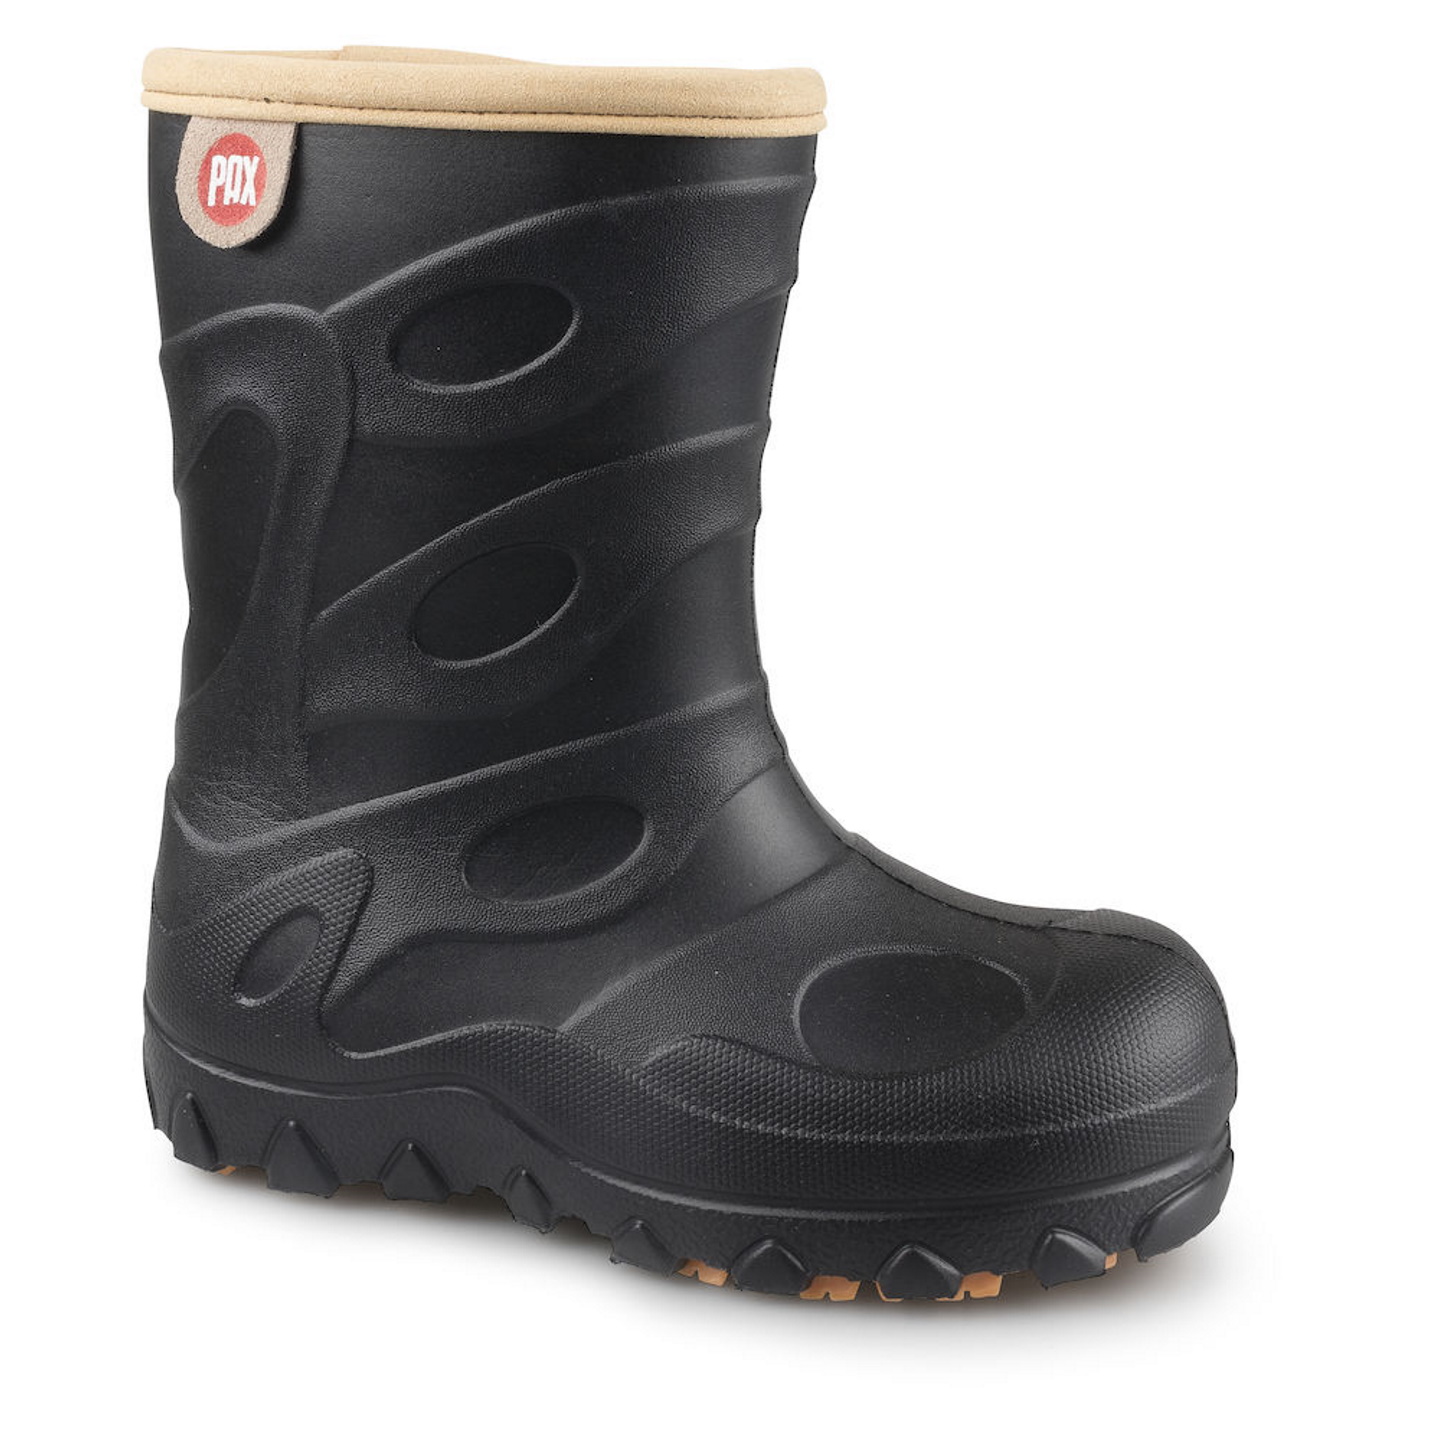 Pax Kids’ Inso Rubber Boot Black